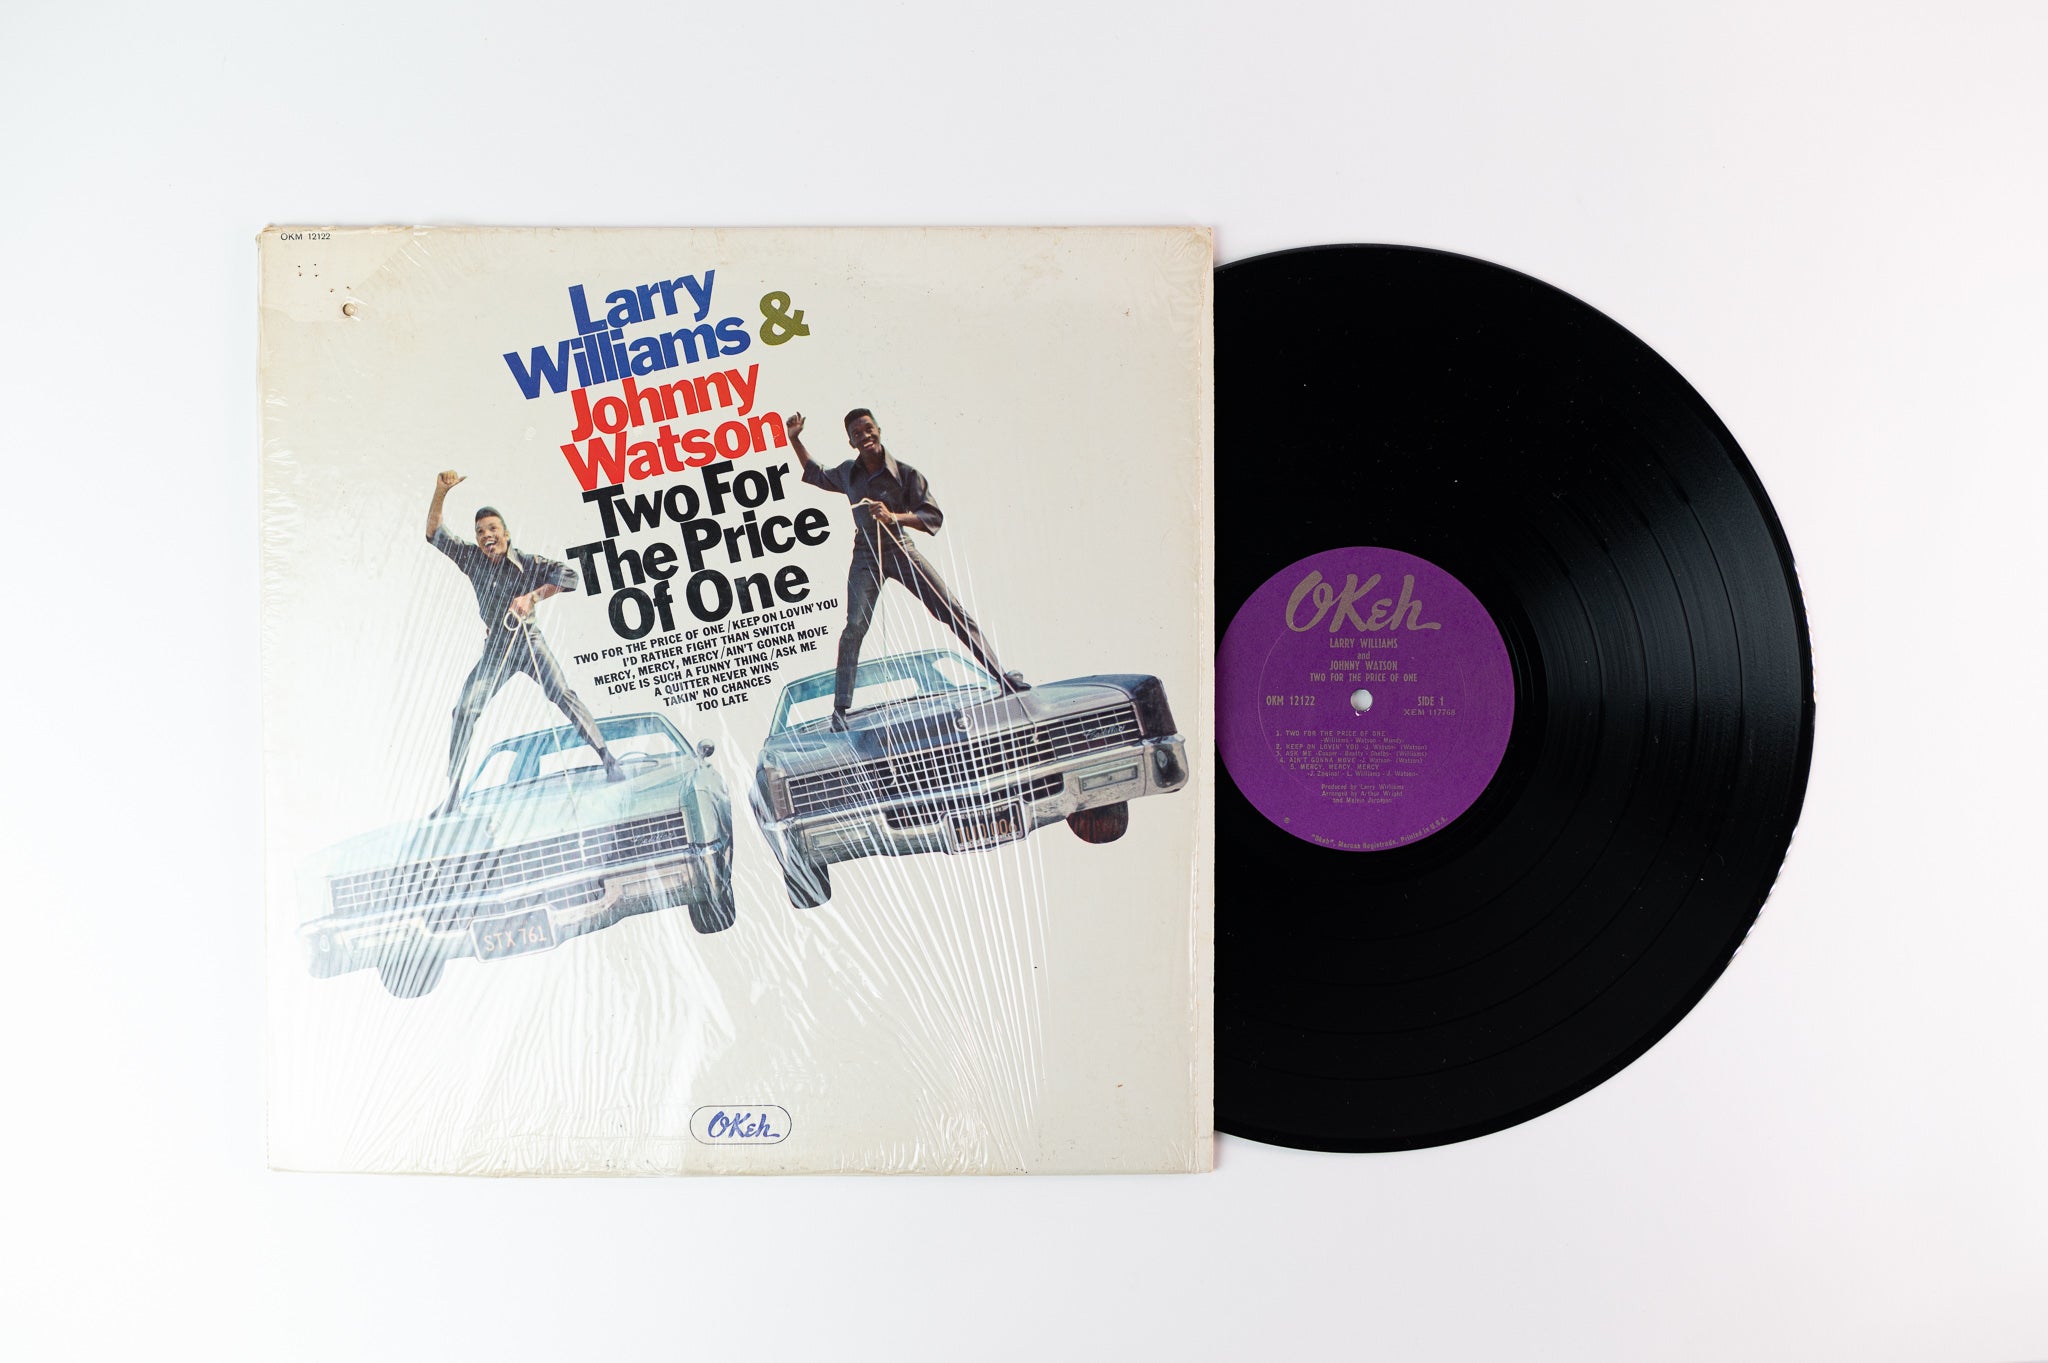 Larry Williams & Johnny Watson - Two For The Price Of One on Okeh - Mono